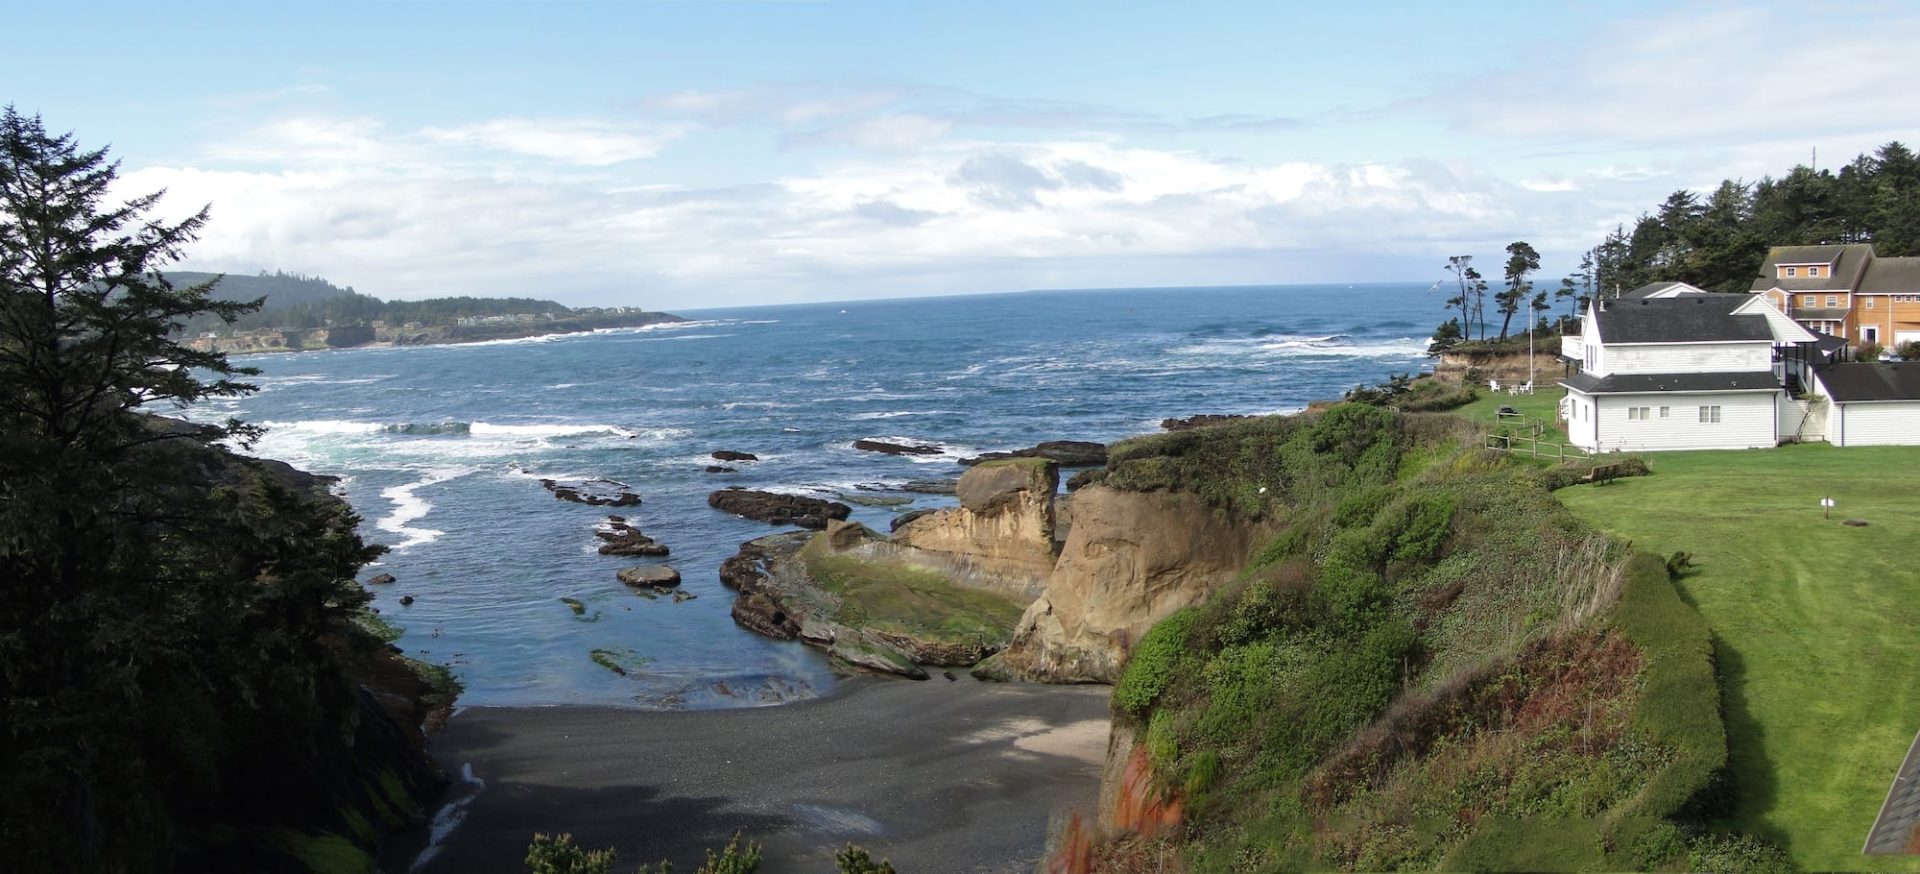 Things to Do in Depoe Bay, Oregon